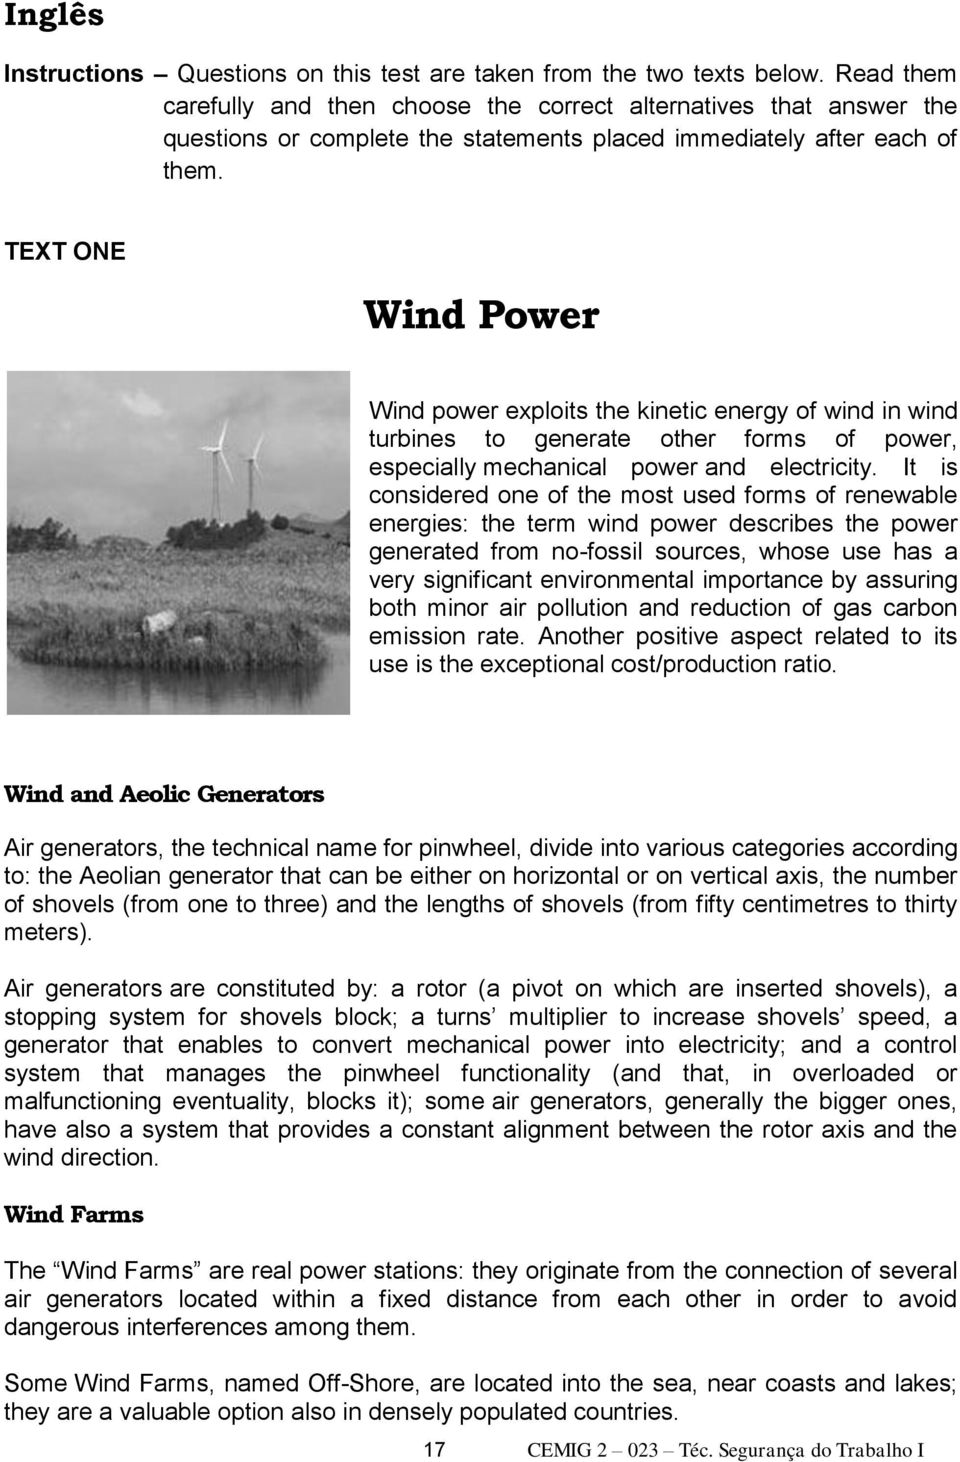 TEXT ONE Wind Power Wind power exploits the kinetic energy of wind in wind turbines to generate other forms of power, especially mechanical power and electricity.